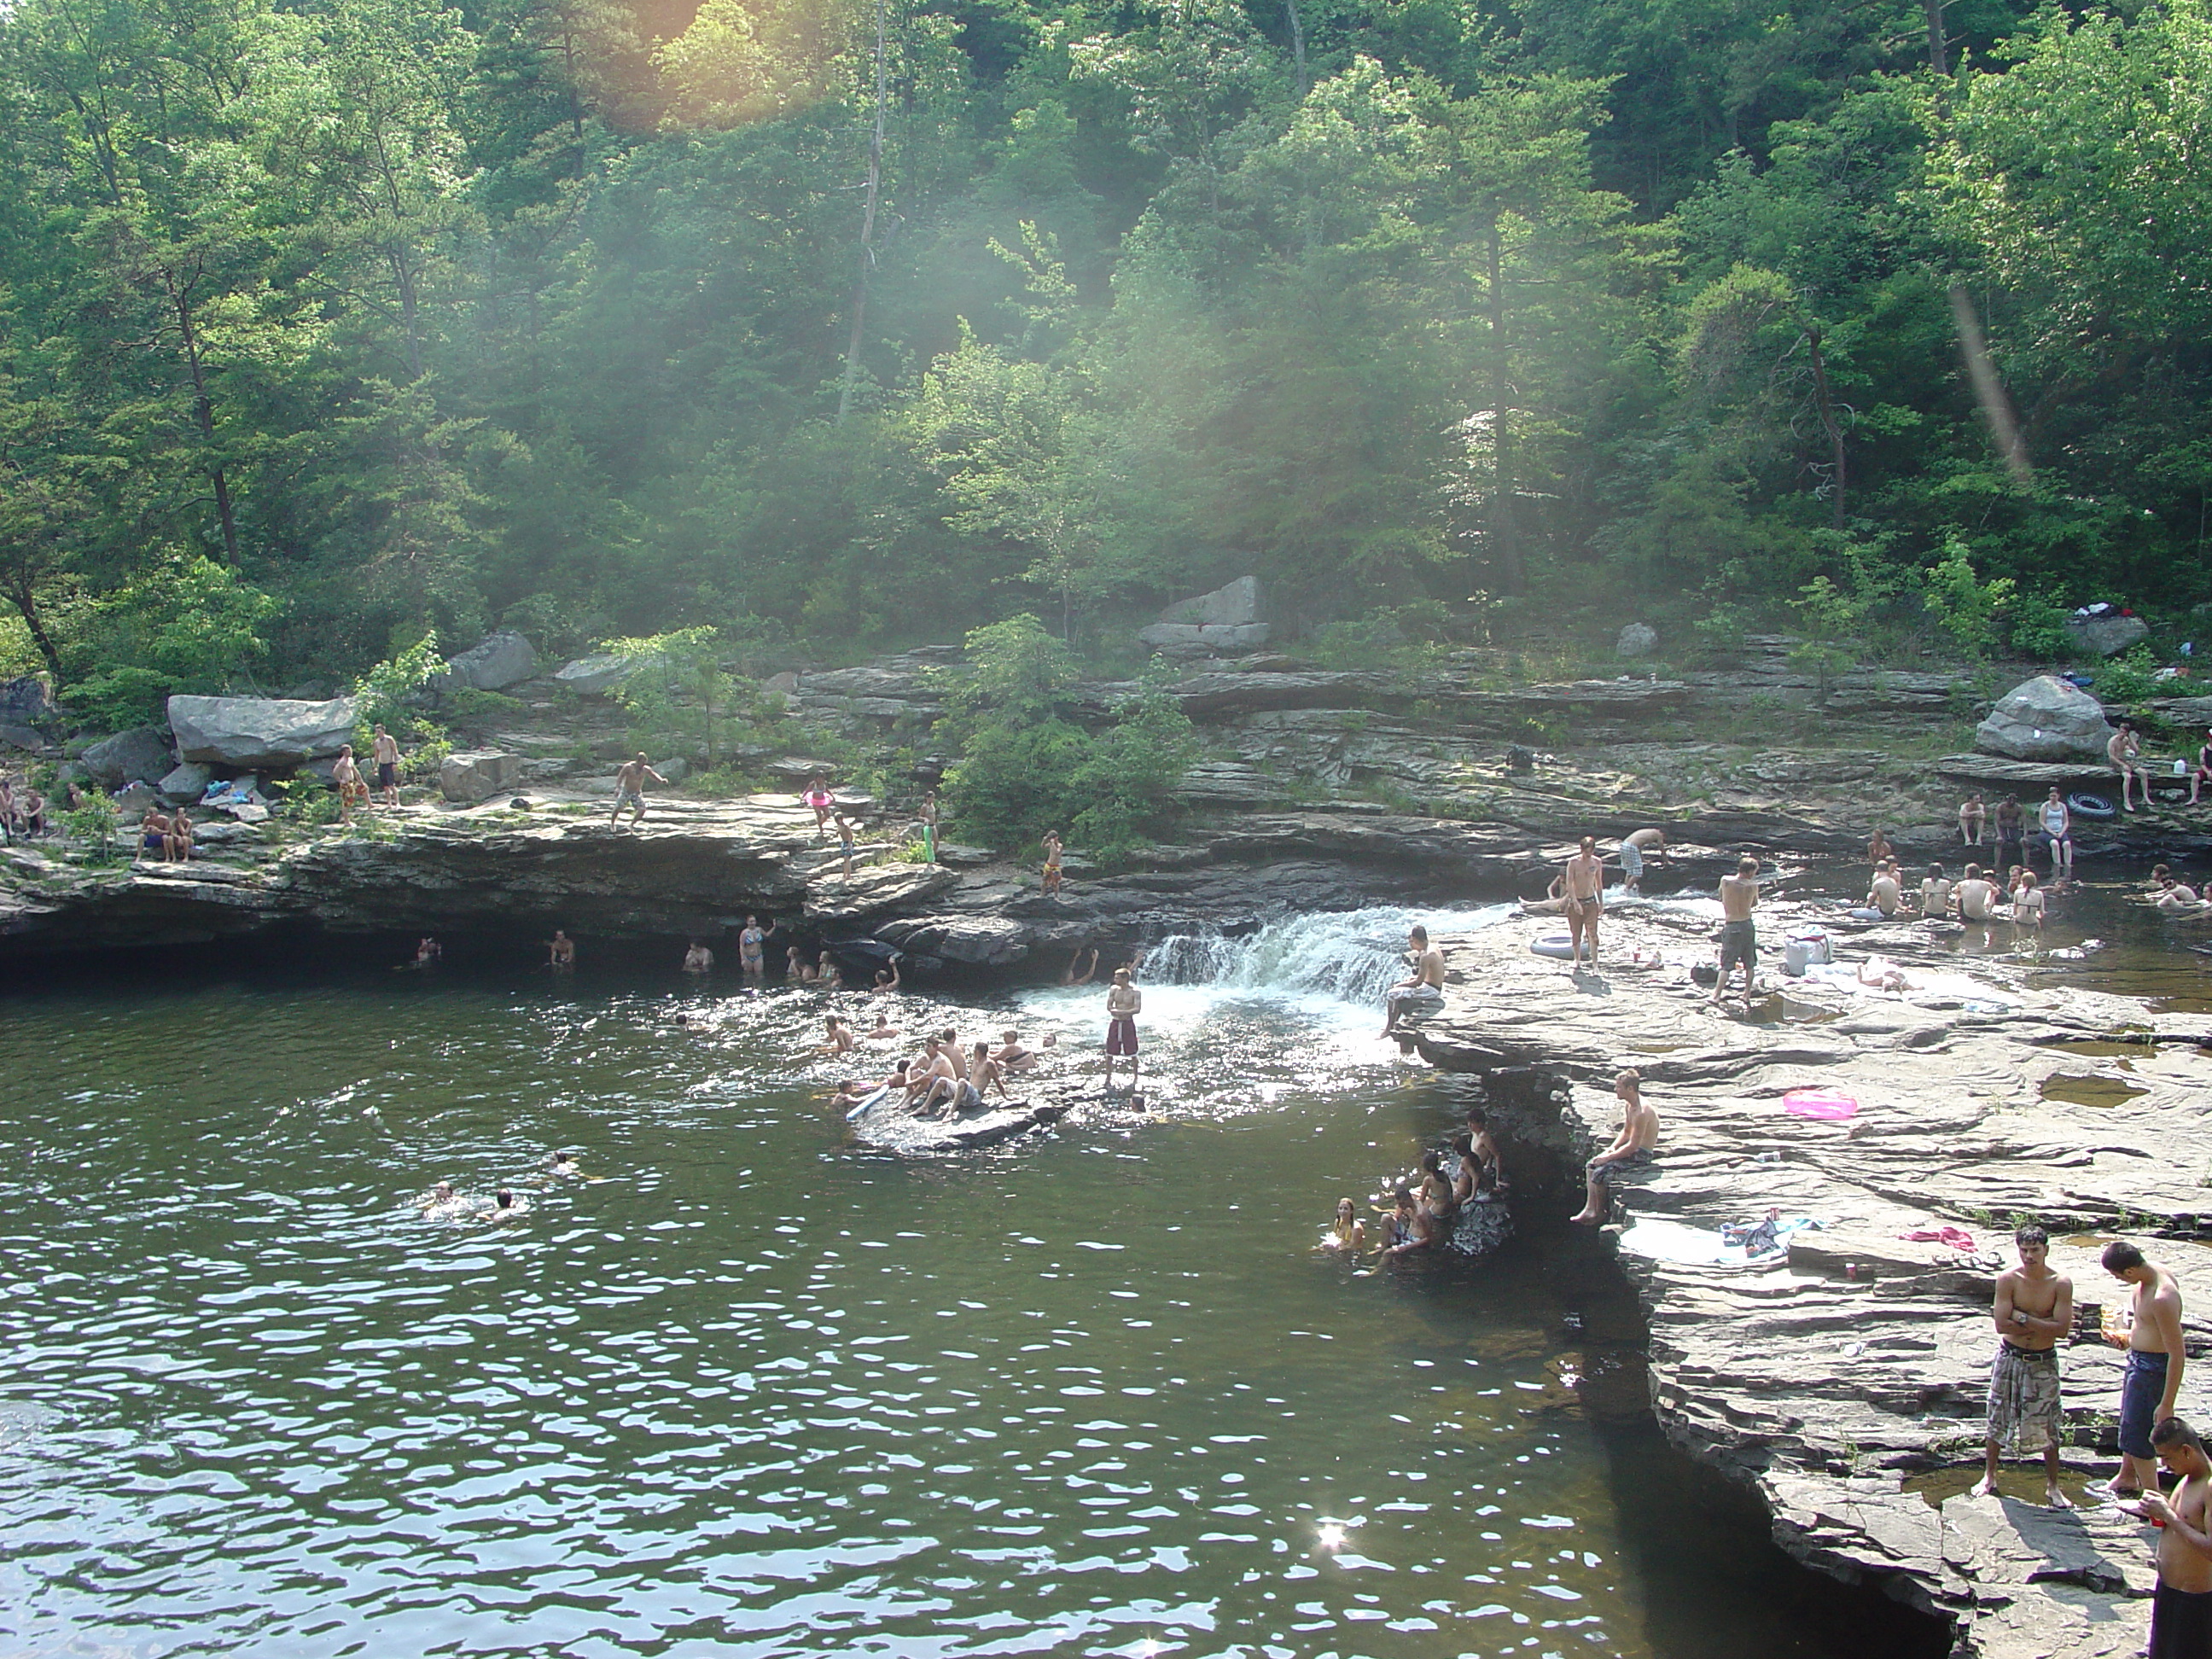 A shelf of sandstone forms Little Falls, a popular swimming hole in the summer and a beautiful setting in the fall.